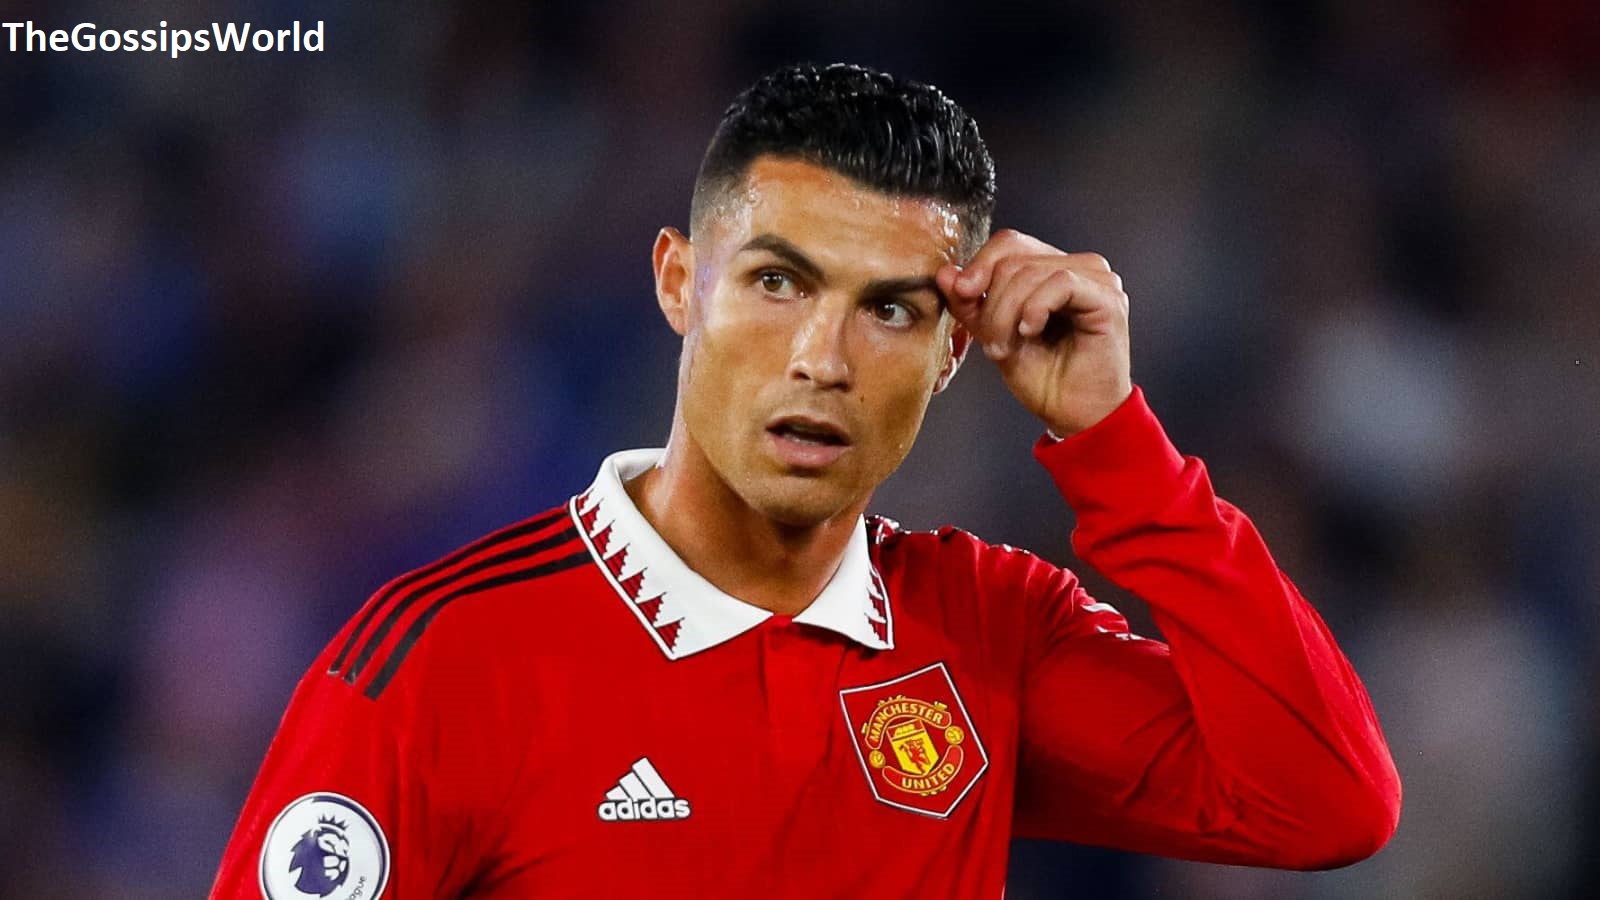 What Are Cristiano Ronaldo's Next Club Options After Leaving Manchester United?